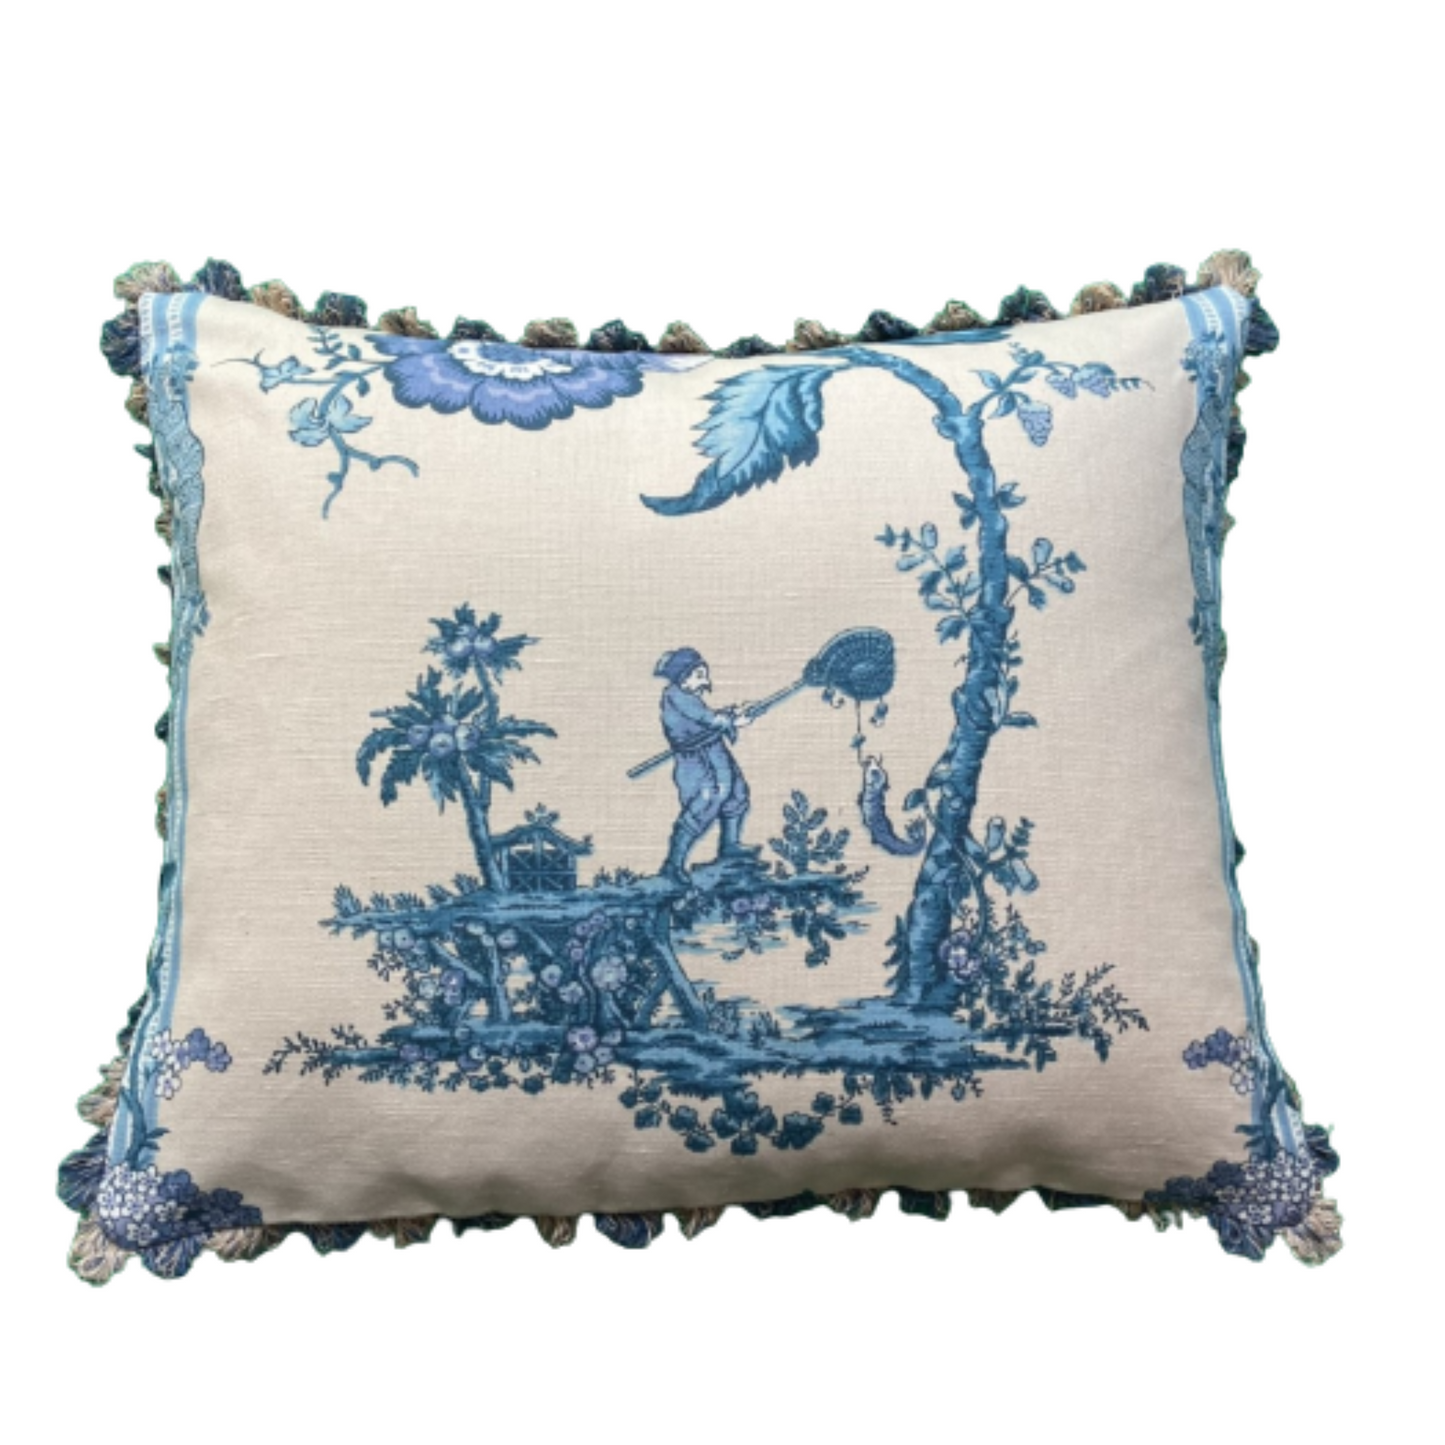 Traditional Chinoiserie Les Pecheurs from Bailey & Griffin with Samuel and Sons Fan Trim 16 X 20 Pillow with Down Feather Insert